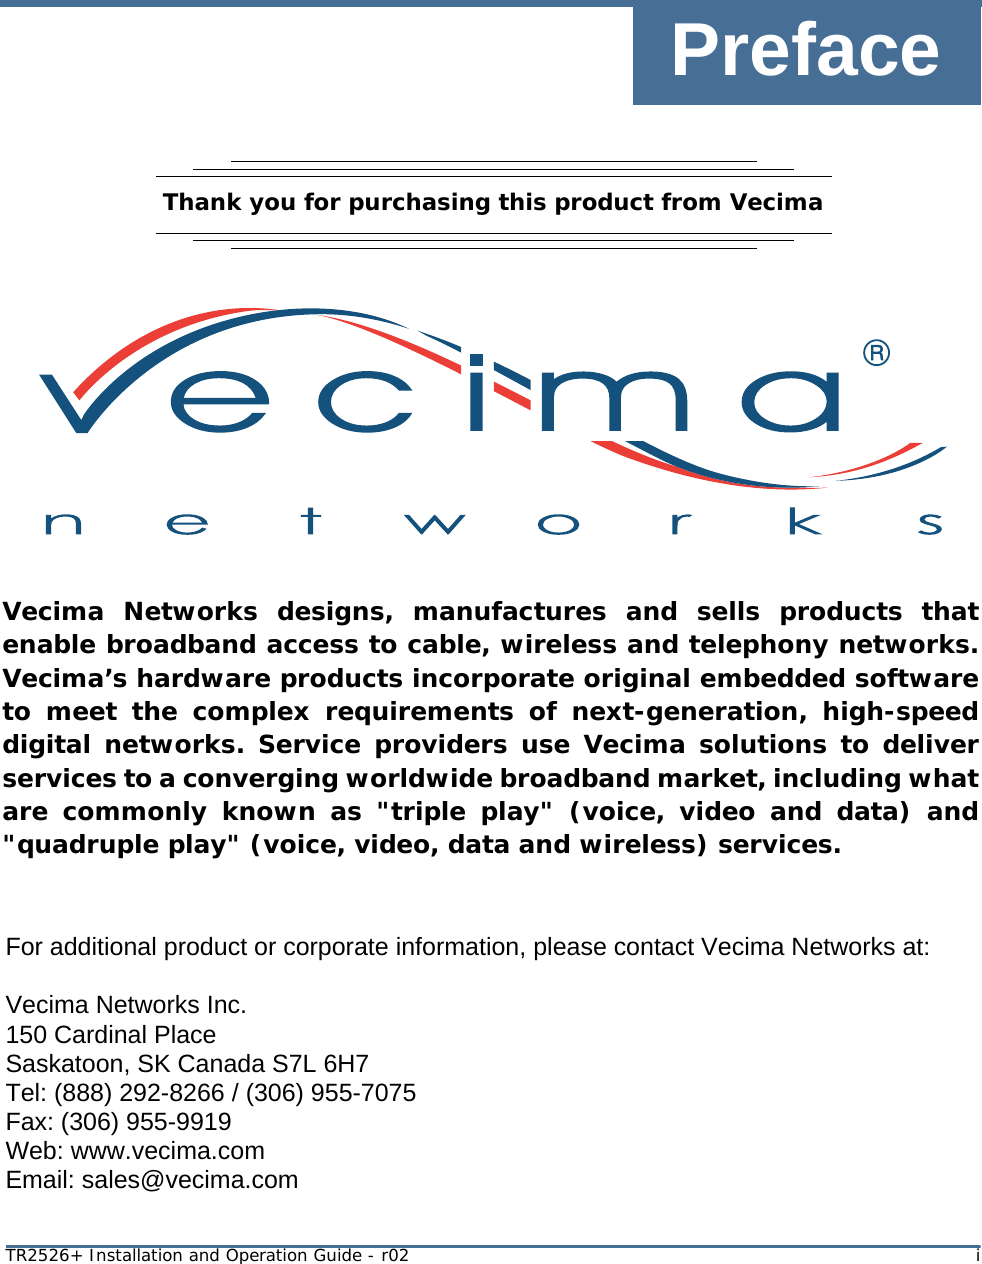 PrefaceTR2526+ Installation and Operation Guide - r02 iThank you for purchasing this product from Vecima Vecima Networks designs, manufactures and sells products that enable broadband access to cable, wireless and telephony networks. Vecima’s hardware products incorporate original embedded software to meet the complex requirements of next-generation, high-speed digital networks. Service providers use Vecima solutions to deliver services to a converging worldwide broadband market, including what are commonly known as &quot;triple play&quot; (voice, video and data) and &quot;quadruple play&quot; (voice, video, data and wireless) services.For additional product or corporate information, please contact Vecima Networks at:Vecima Networks Inc.150 Cardinal PlaceSaskatoon, SK Canada S7L 6H7Tel: (888) 292-8266 / (306) 955-7075Fax: (306) 955-9919Web: www.vecima.comEmail: sales@vecima.com